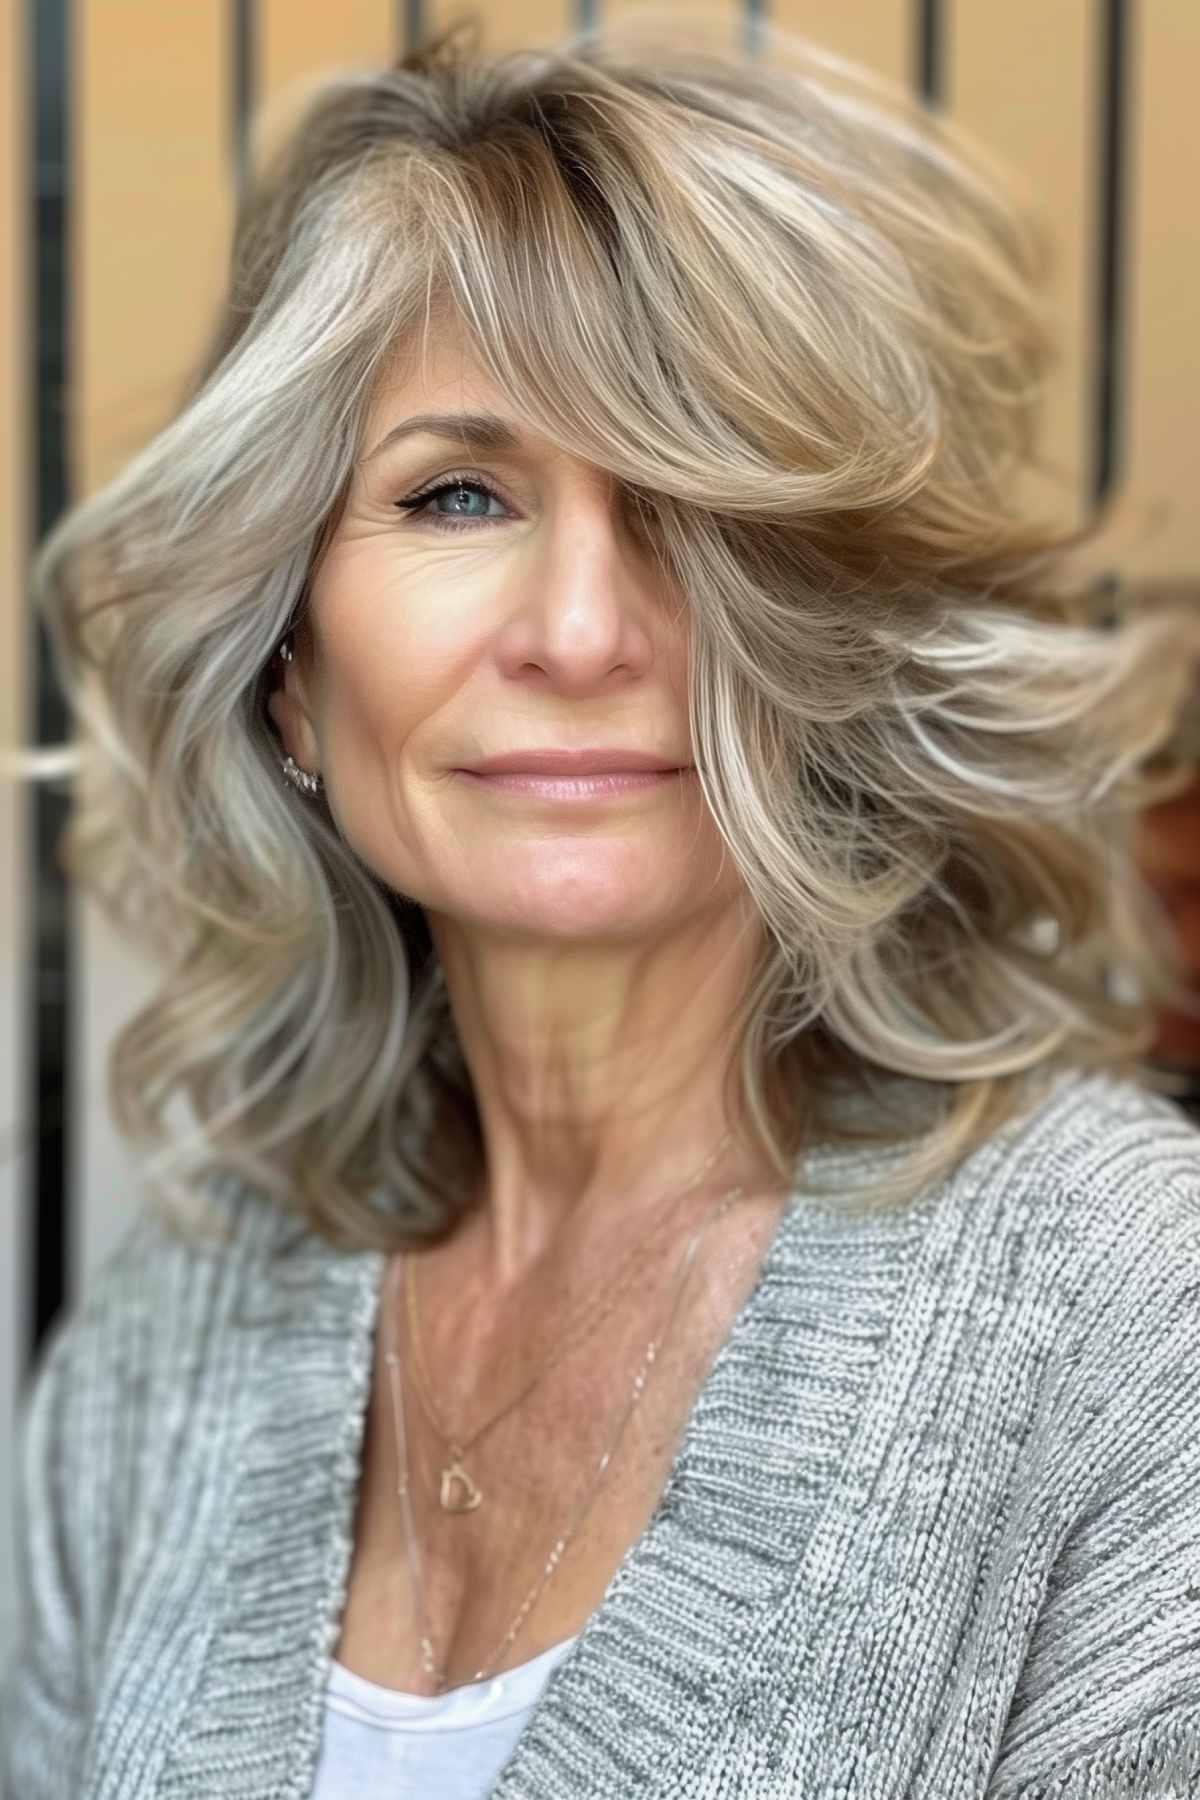 Timeless layered haircut with natural waves and ash blonde highlights on a woman over 50, styled for volume and elegance.